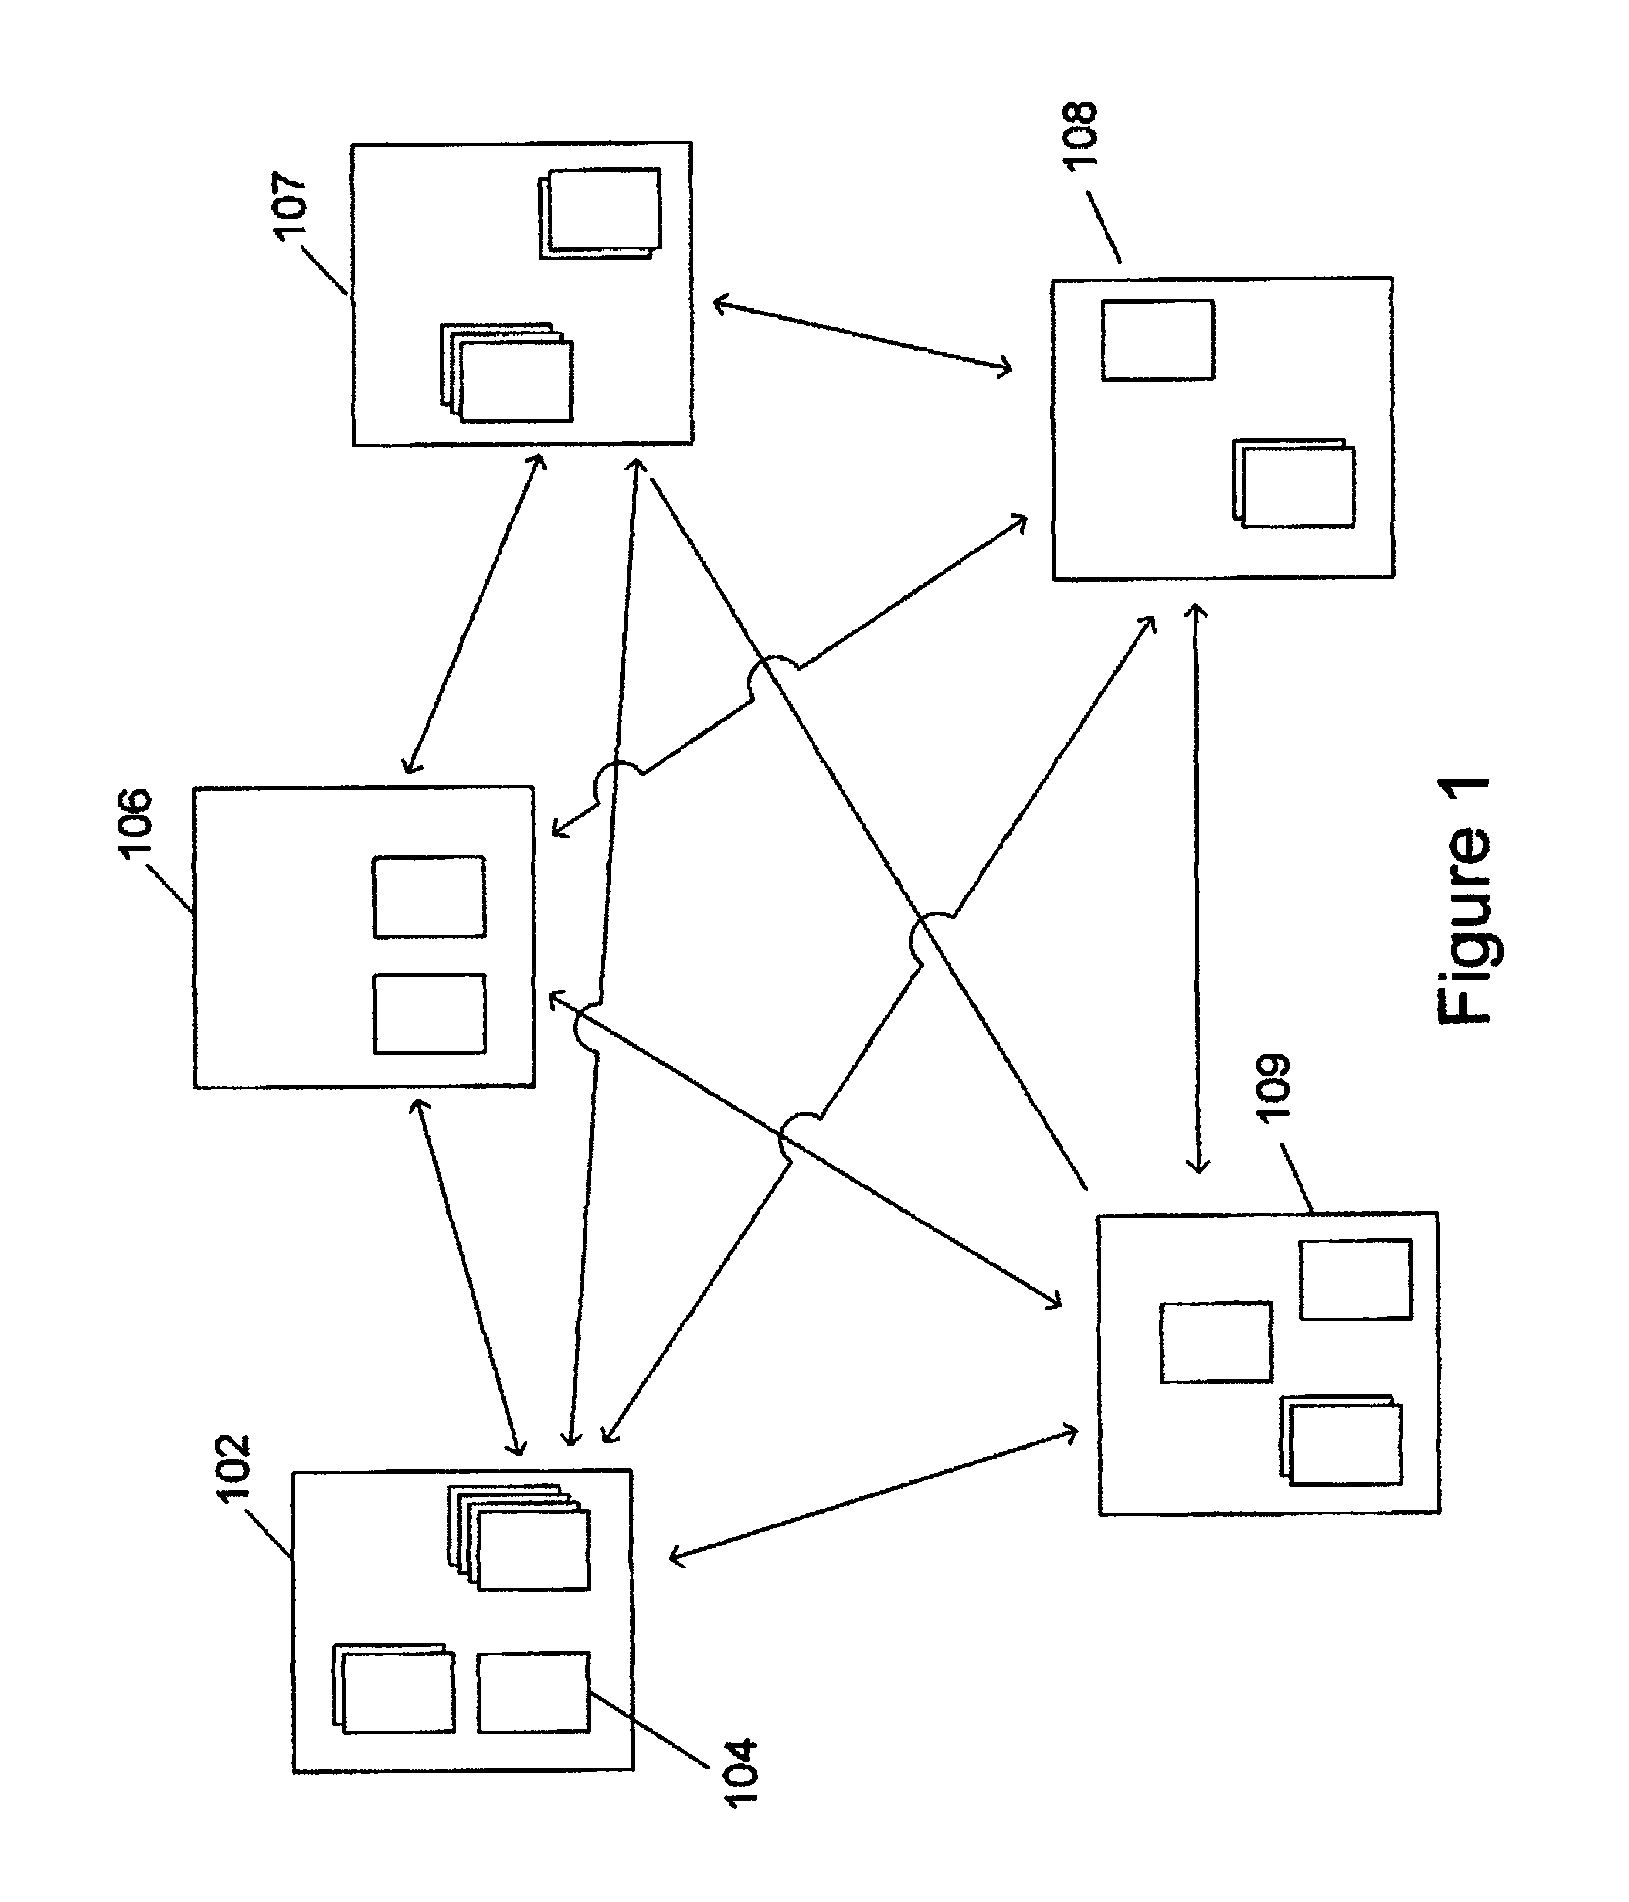 Method and system for tag suggestion in a tag-associated data-object storage system